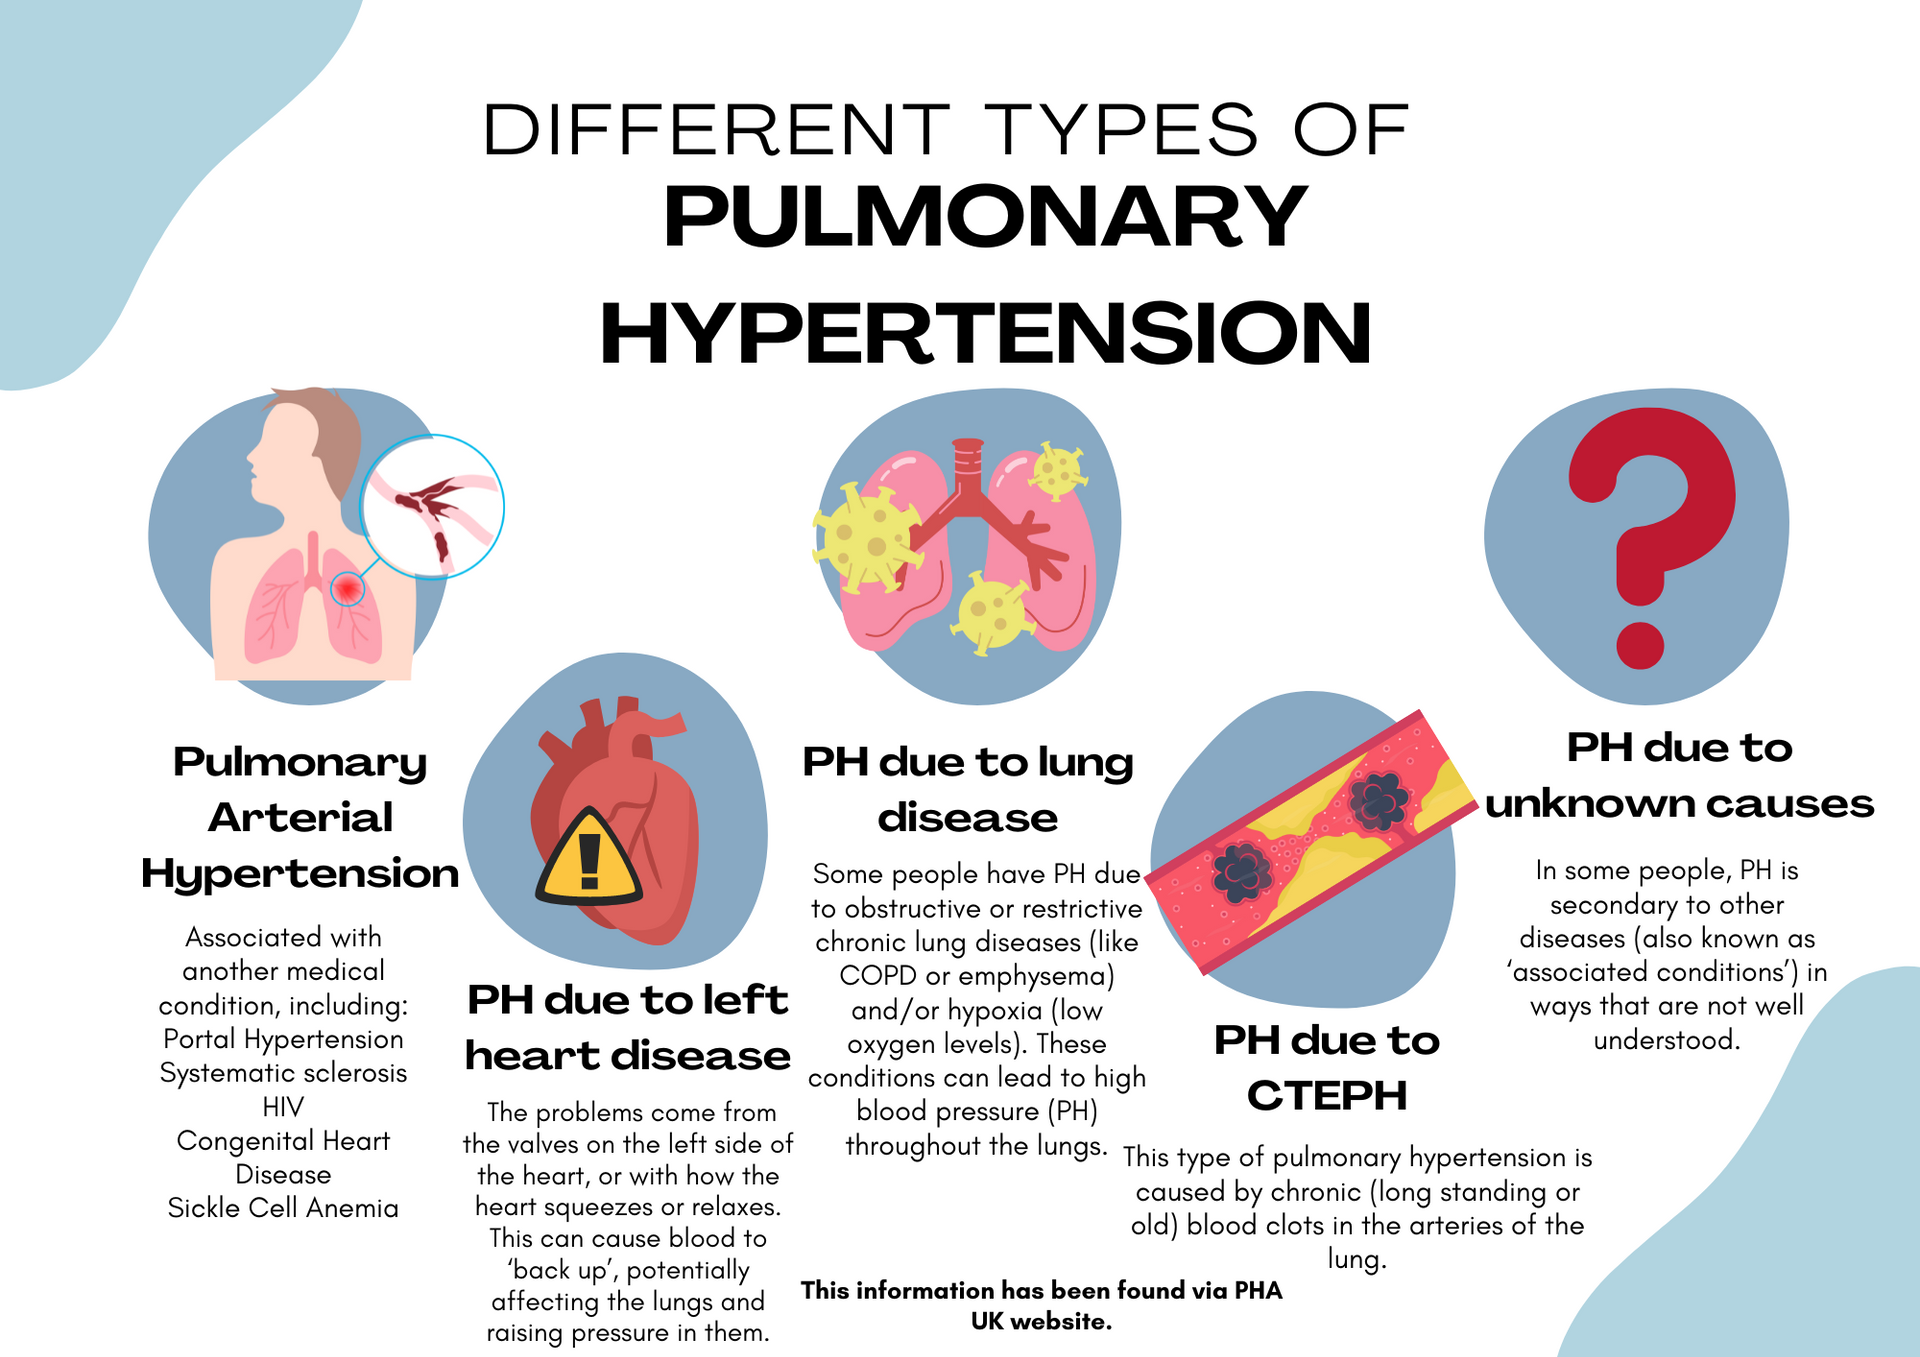 An infographic detailing the different types of Pulmonary Hypertension.